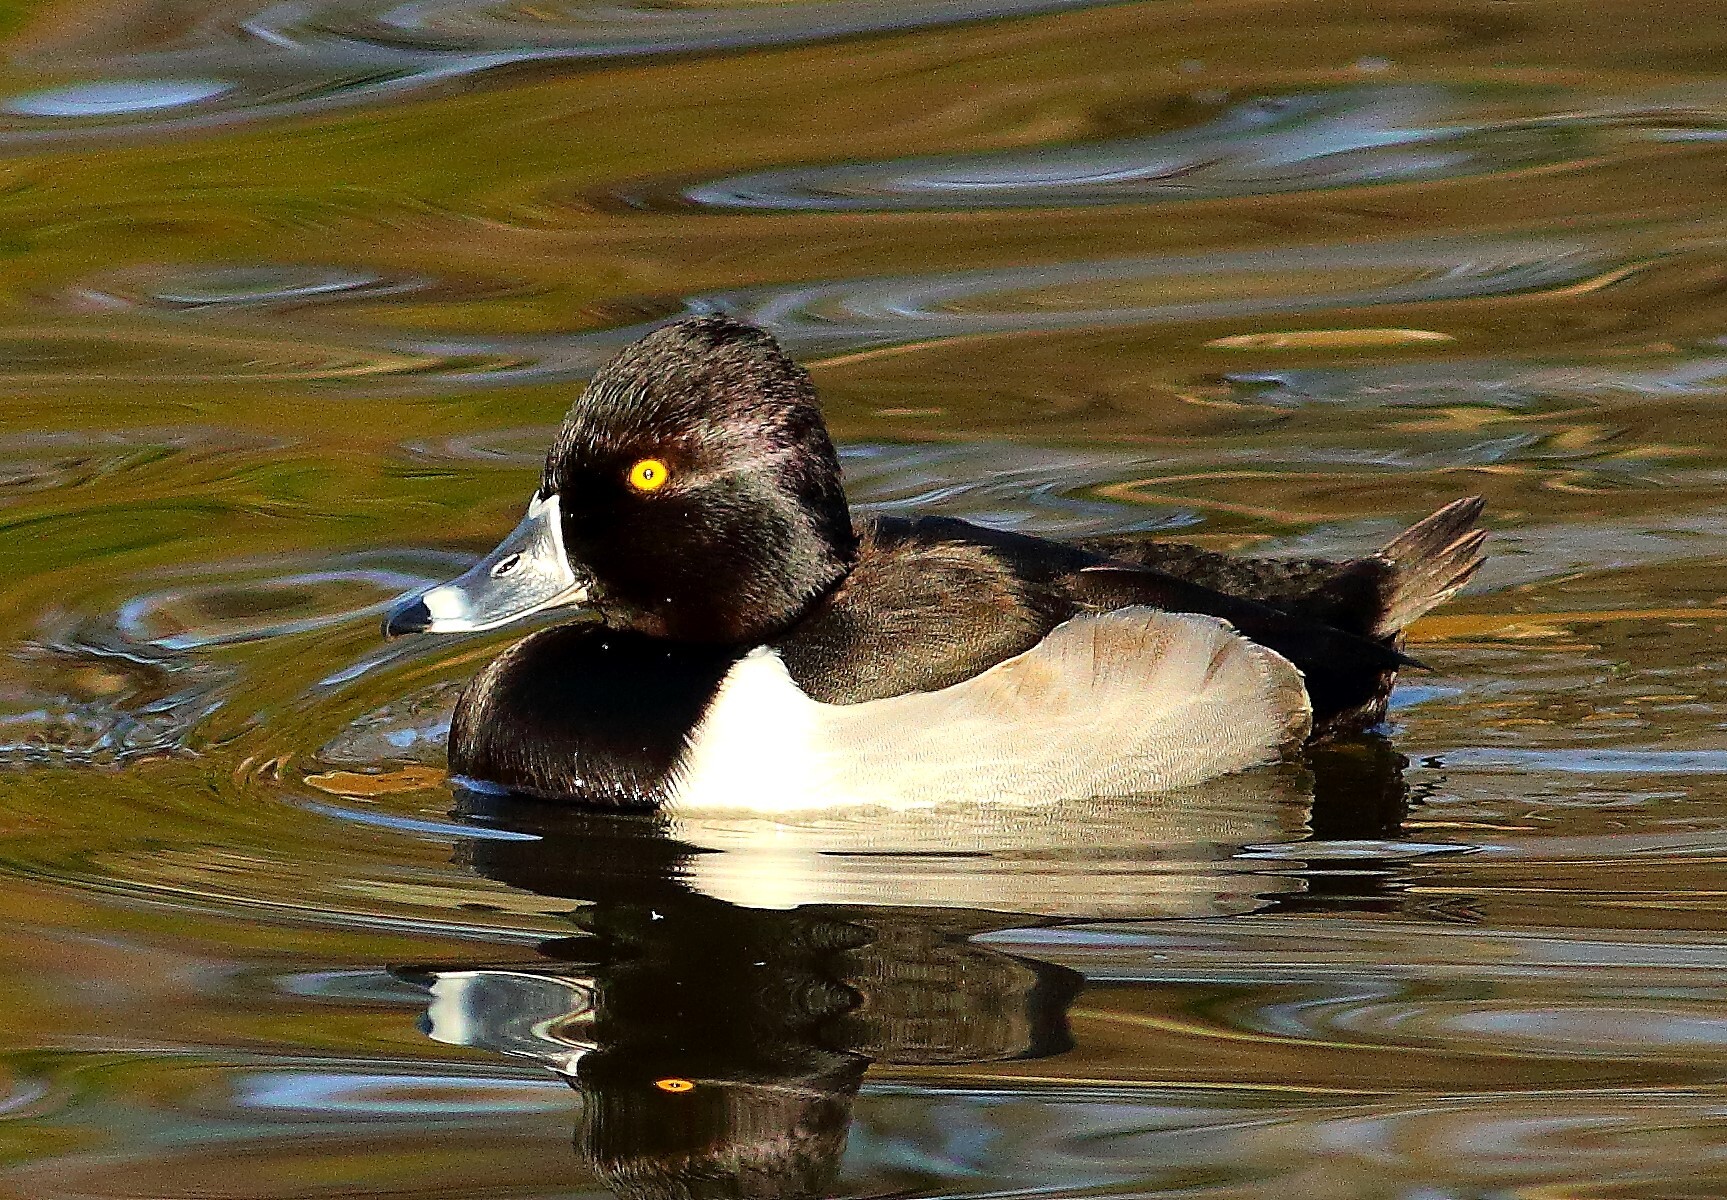 Ridgewood Reservoir is a likely spot for wintering Ring-necked Duck. Photo: <a href="https://www.flickr.com/photos/120553232@N02/" target="_blank">Isaac Grant</a>